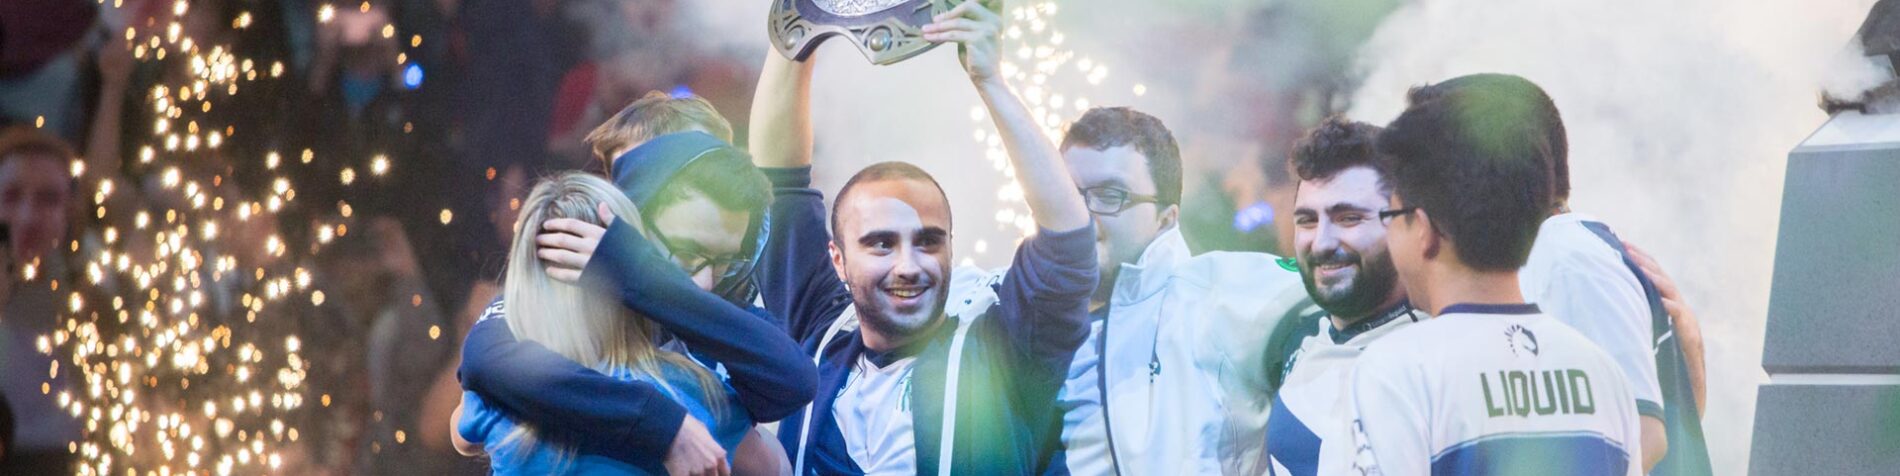 SAP Announces First Collaboration in esports and Becomes the Official Innovation Partner of Team Liquid